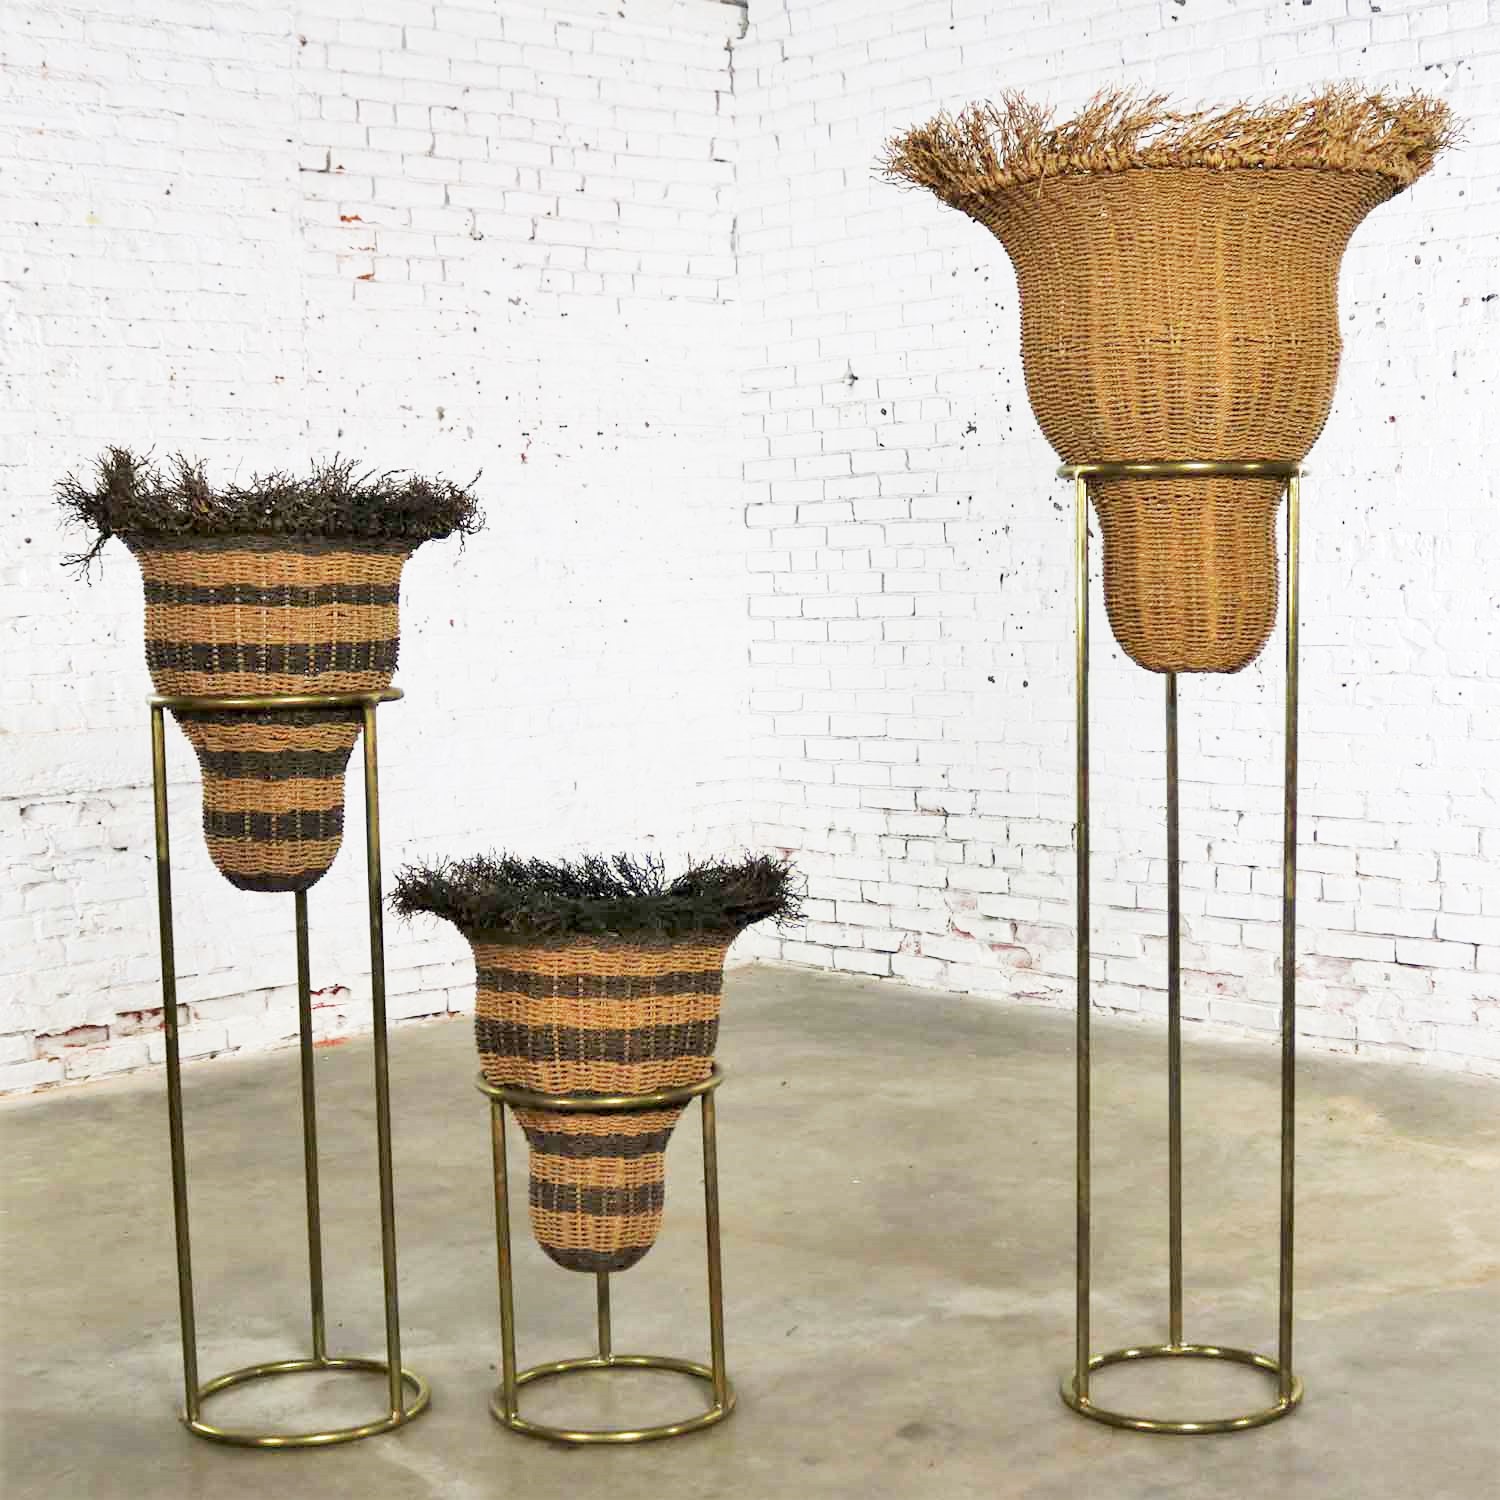 Round Brass Stands with Extra Large Basket Inserts for Plants or Flowers, Set of 3